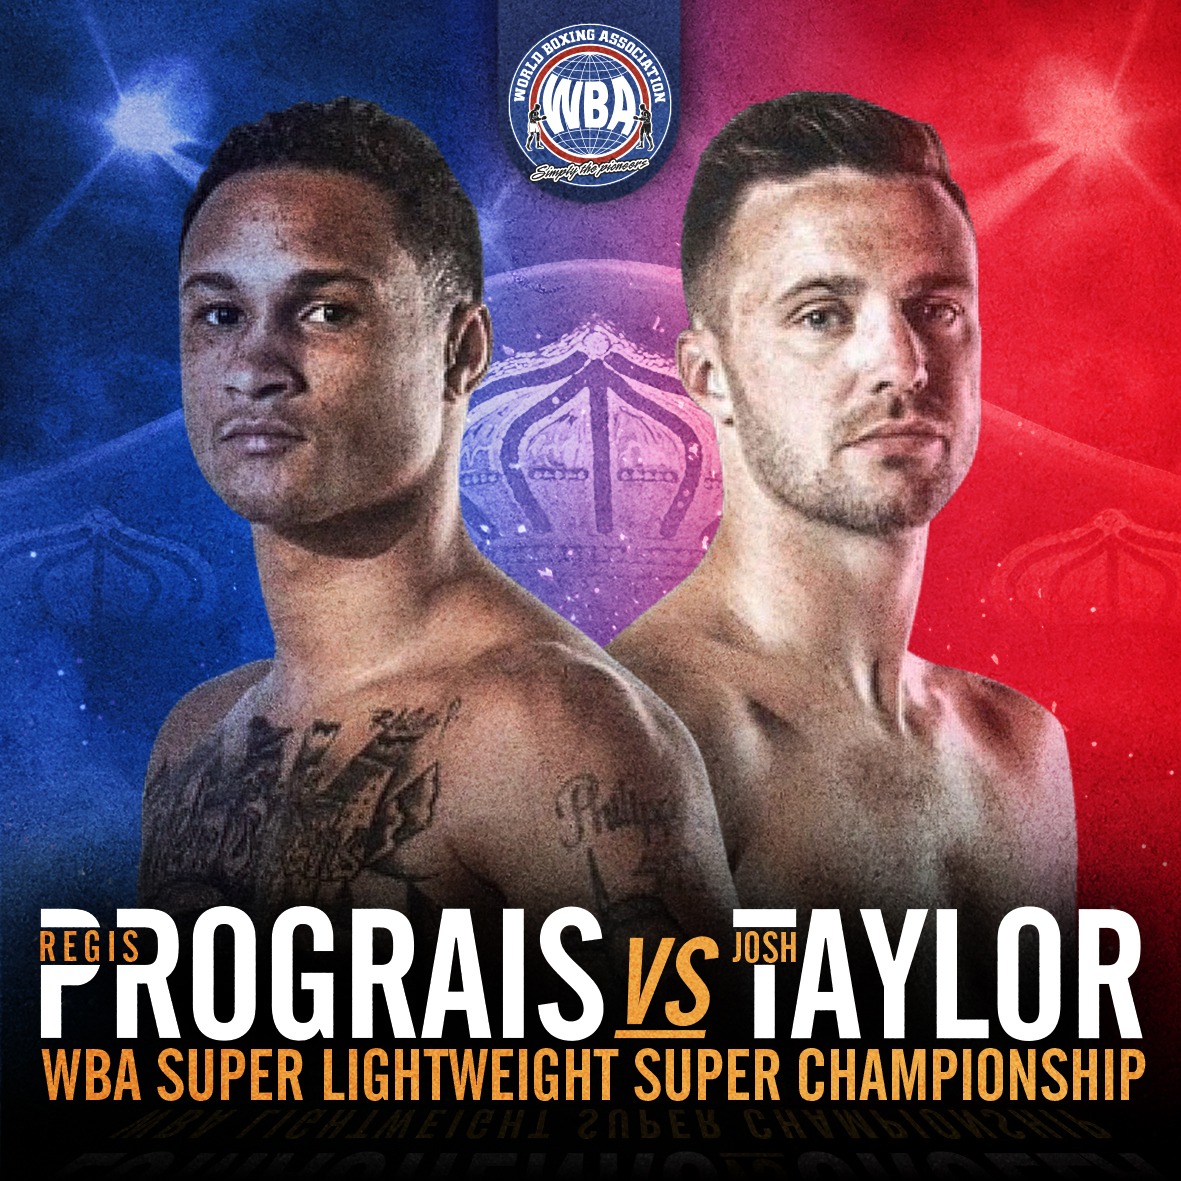 Prograis and Taylor fight for the WBA Super Title and WBSS Ali Trophy